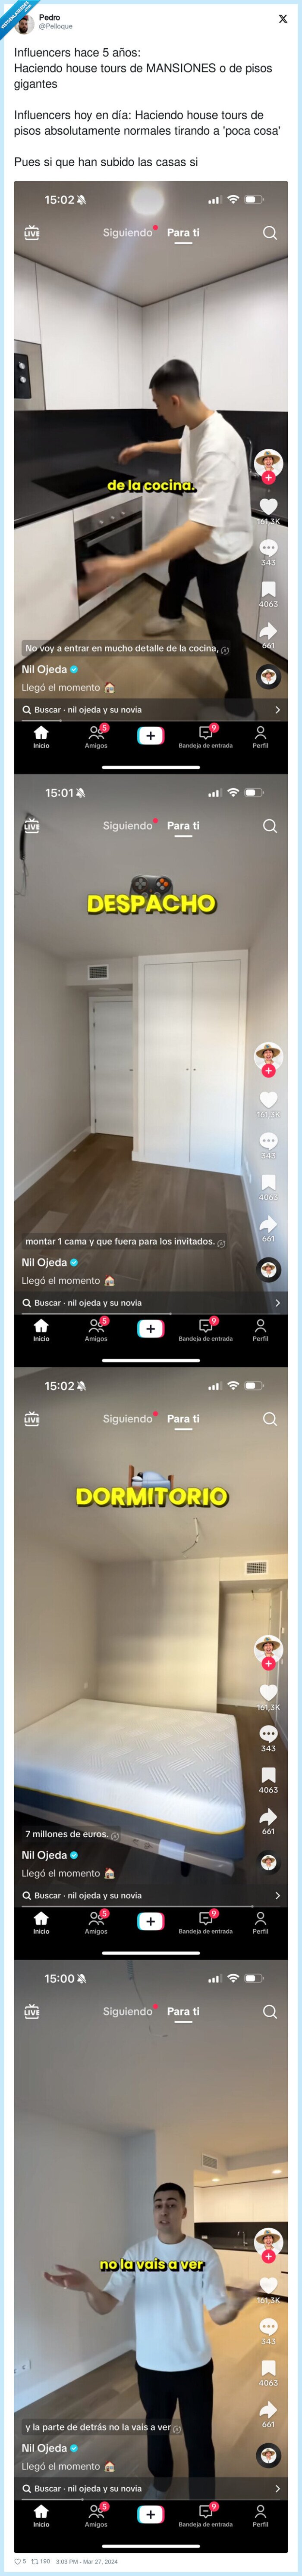 nil ojeda,influencers,mansiones,house tour,normales,gigantes